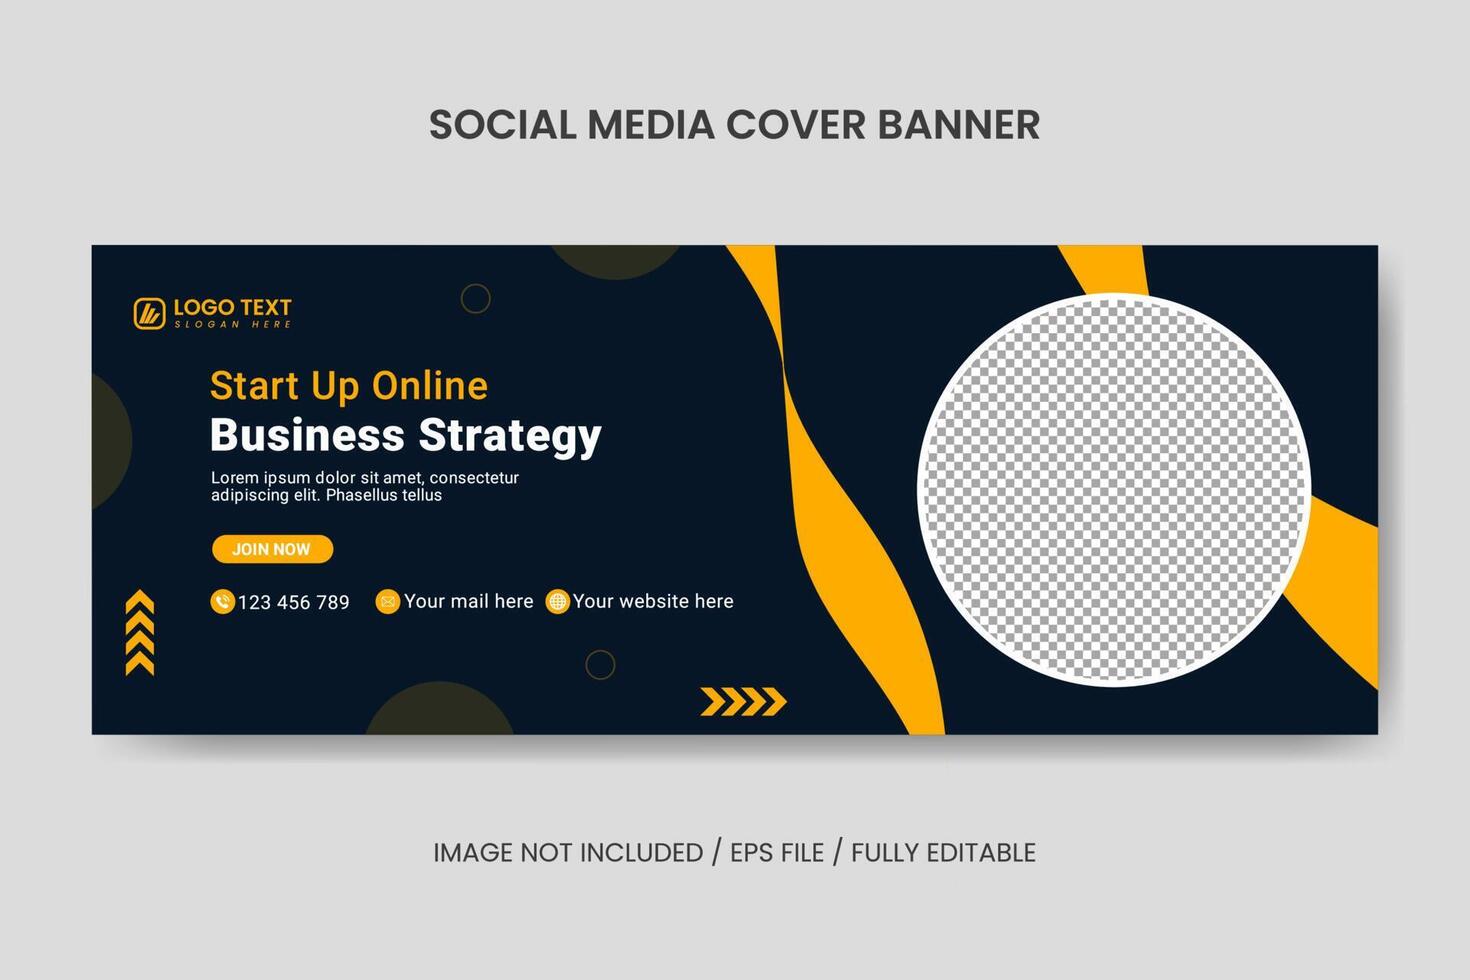 Creative Start-Up online Business Strategy social media facebook cover template, web banner template, corporate banner, header, business webinar banner vector